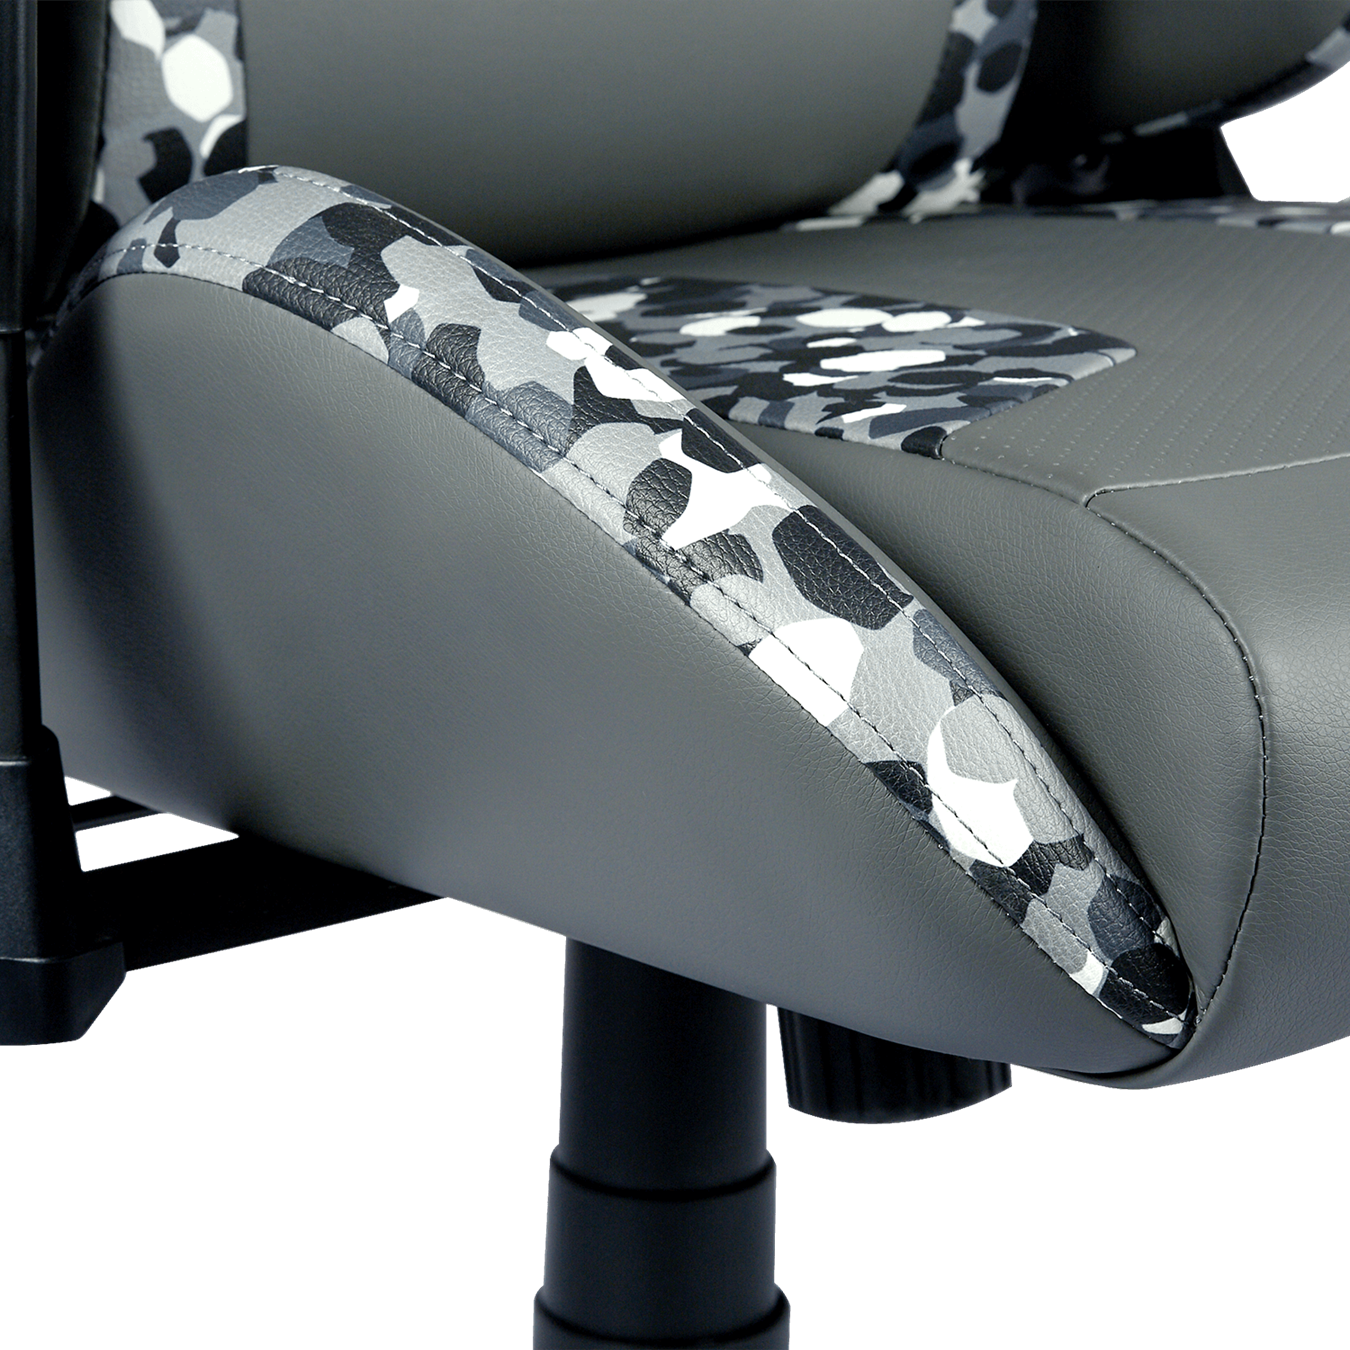 Caliber R1S Dark Knight CAMO Gaming Chair - The breathable PU provides maximum comfort for all body types and keeps you feeling cool and energized at all times.